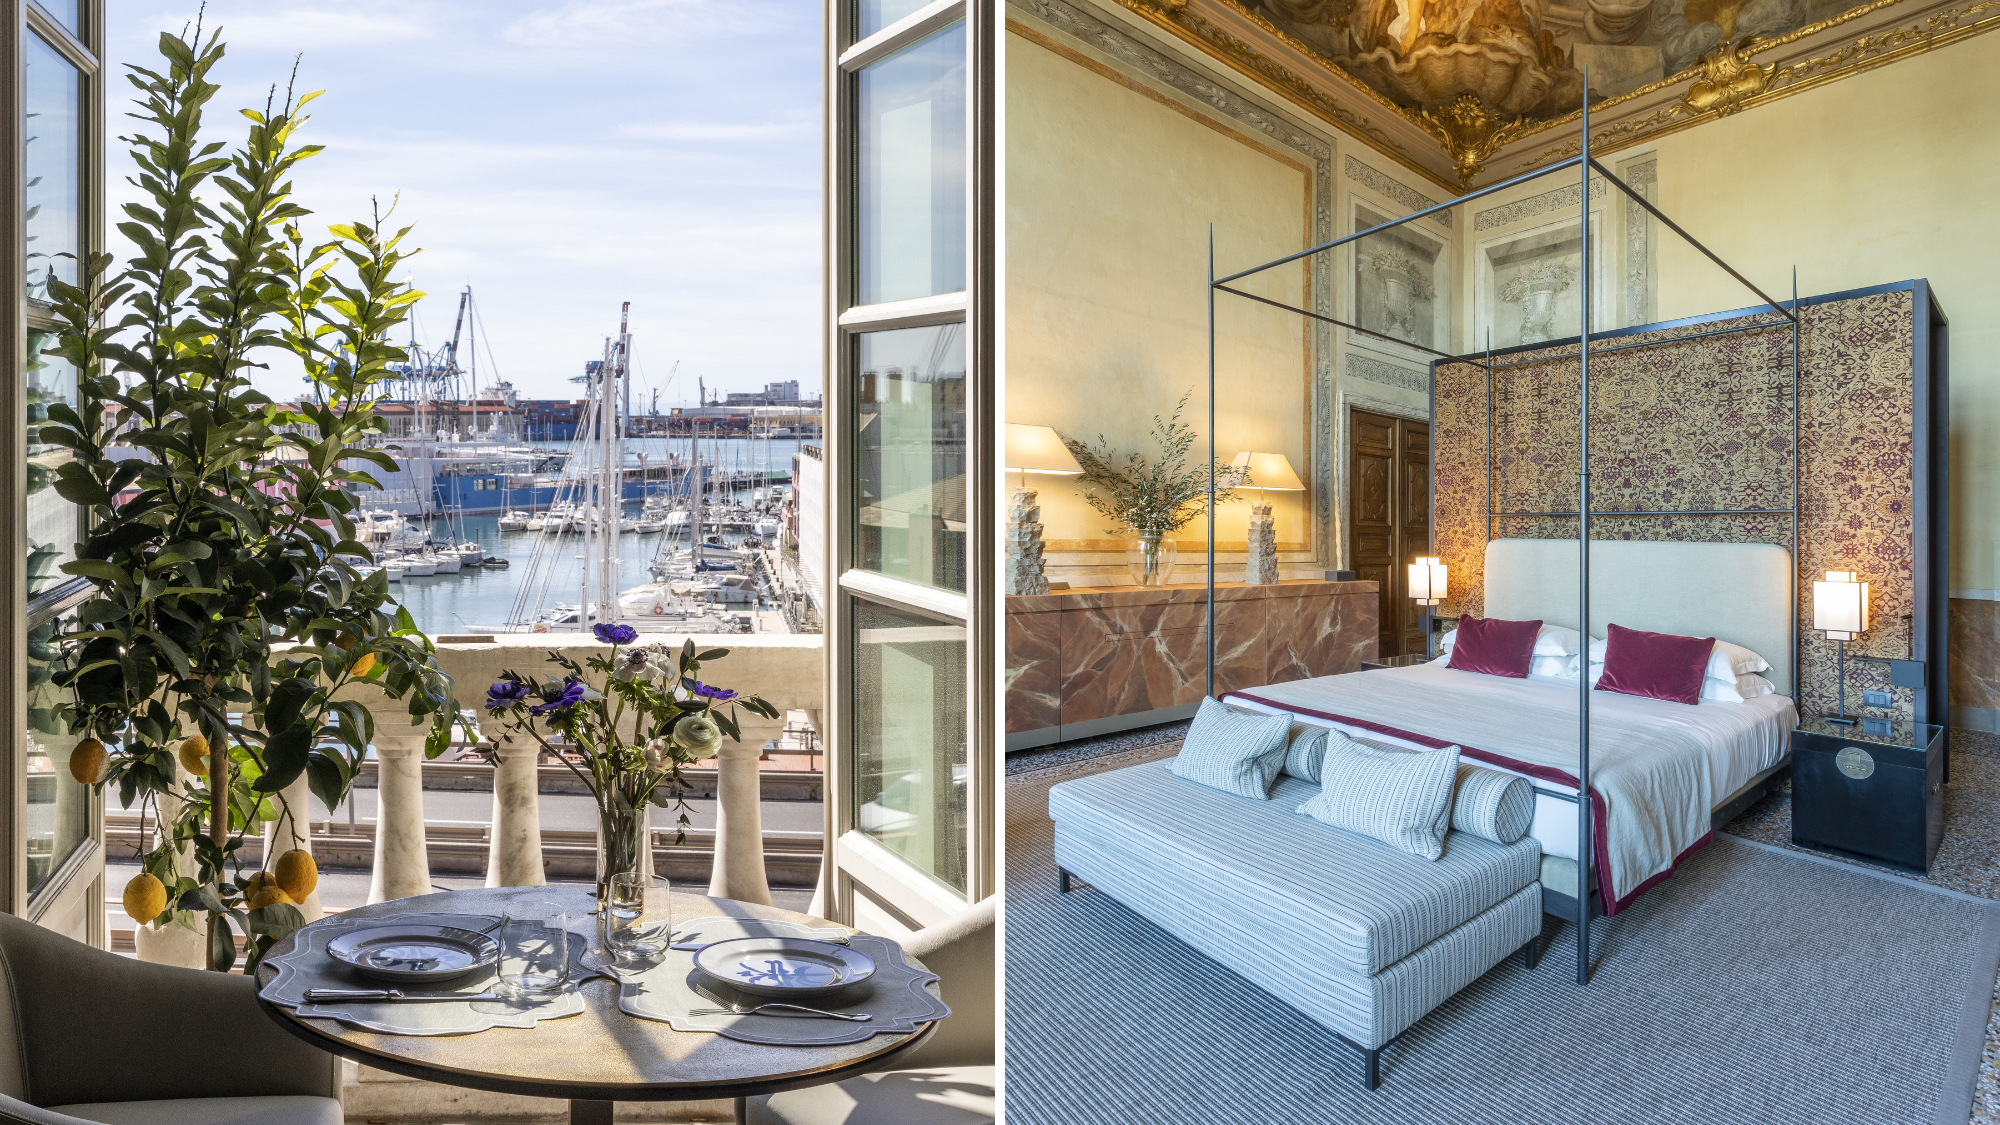 Composite image: A view from the balcony of a suite at Palazzo Durazzo with view across harbour, and a picture of a four poster bed